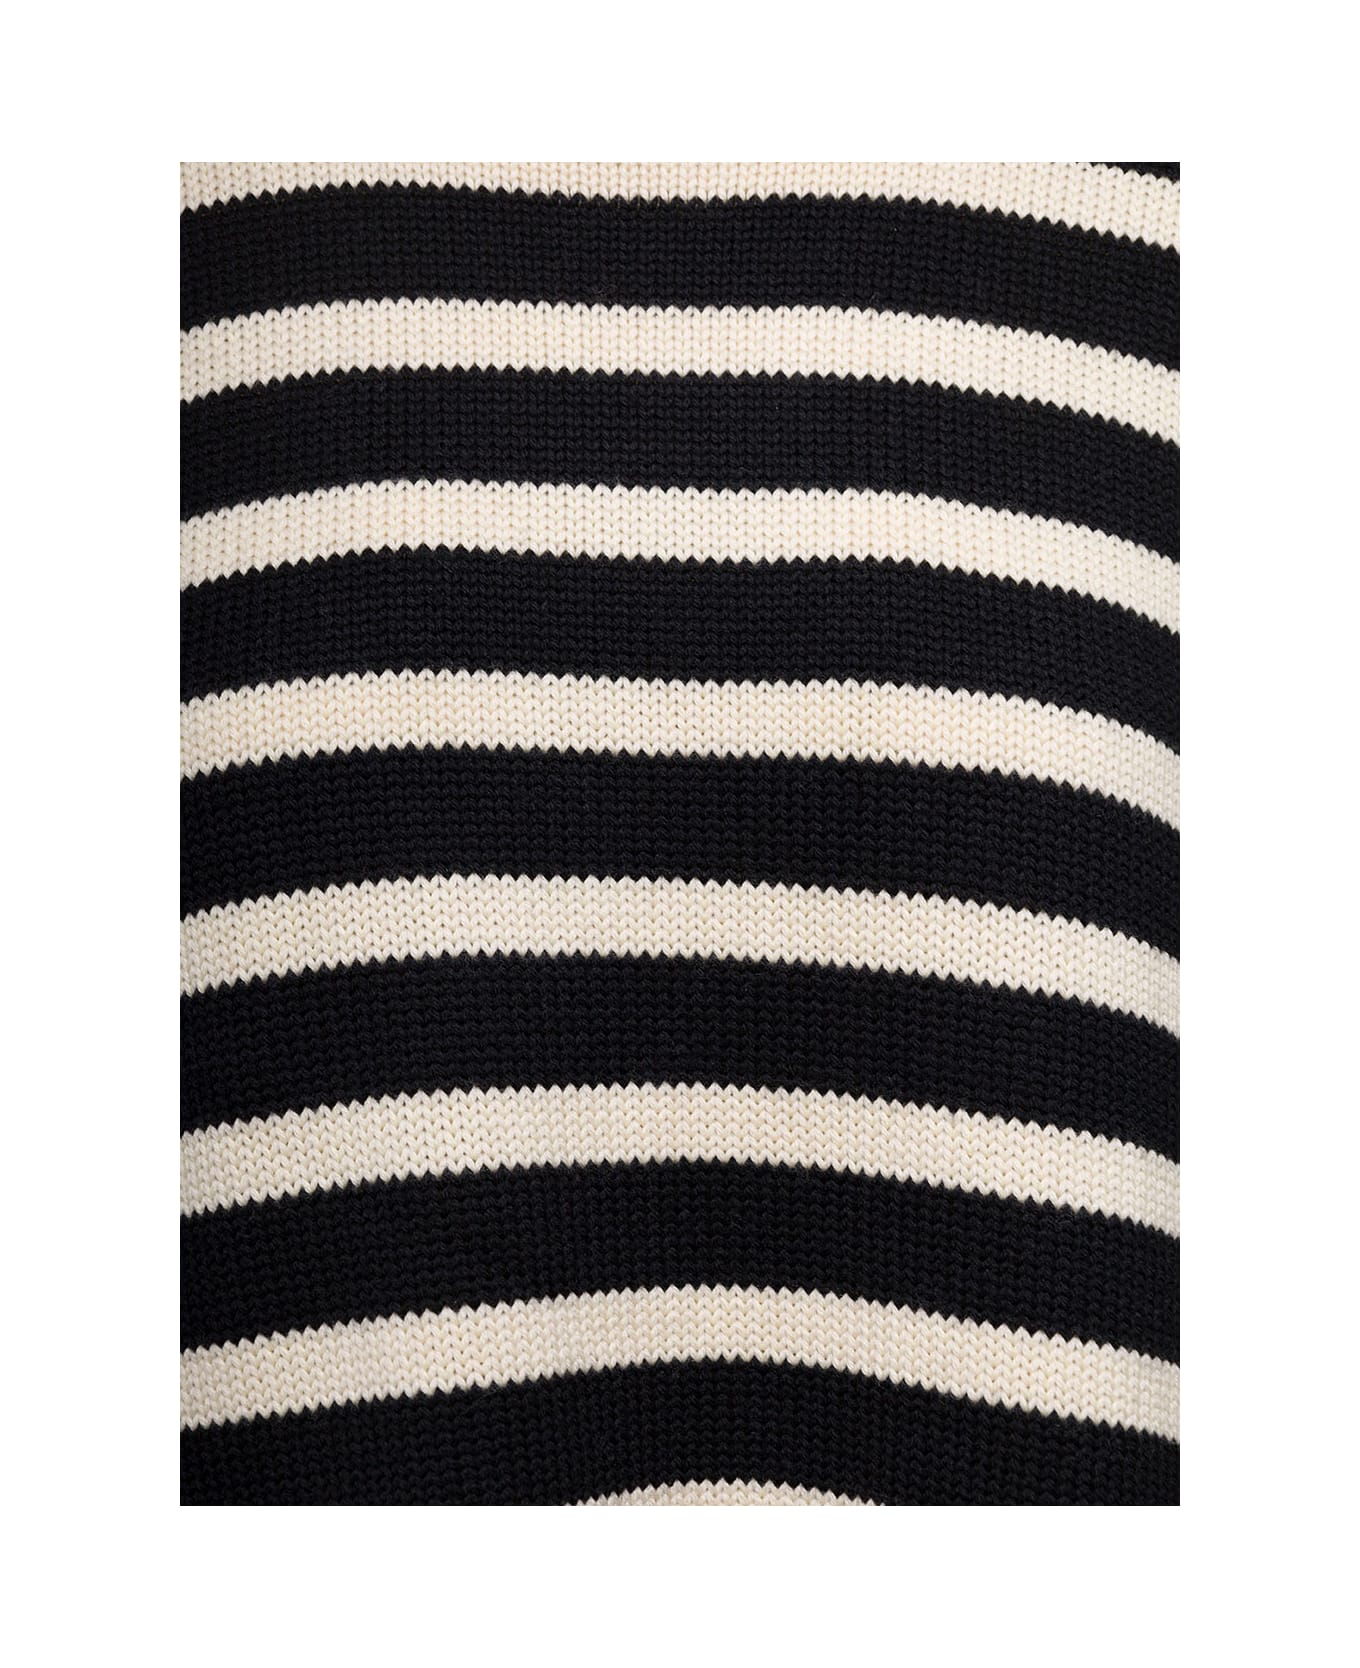 Totême Black And White Sweater With Striped Motif In Wool Woman - Black ニットウェア